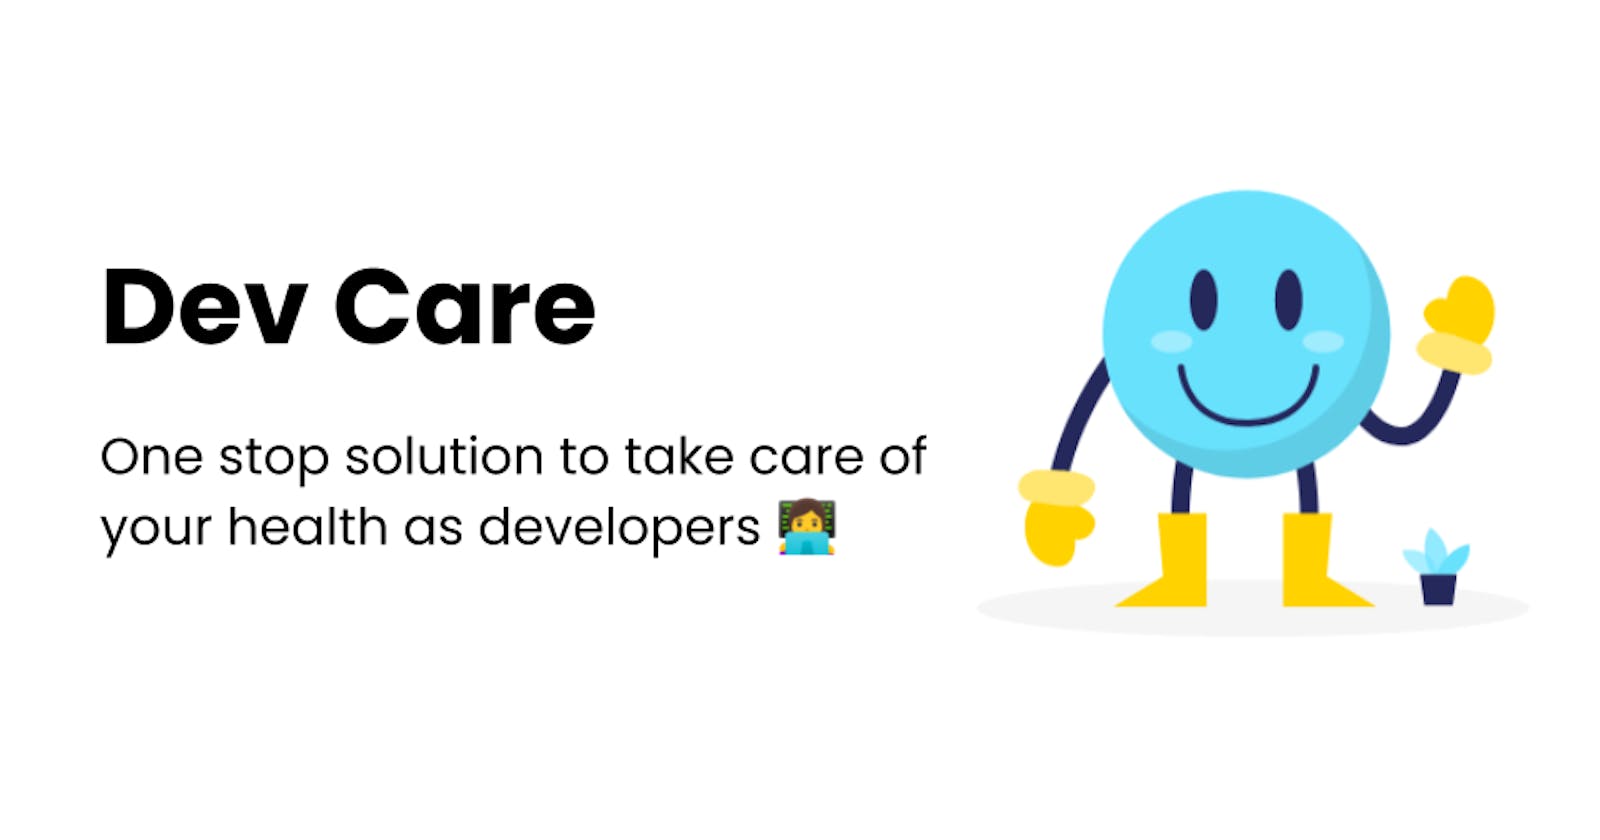 Dev Care: One stop solution to take care of your health as developers 👩‍💻